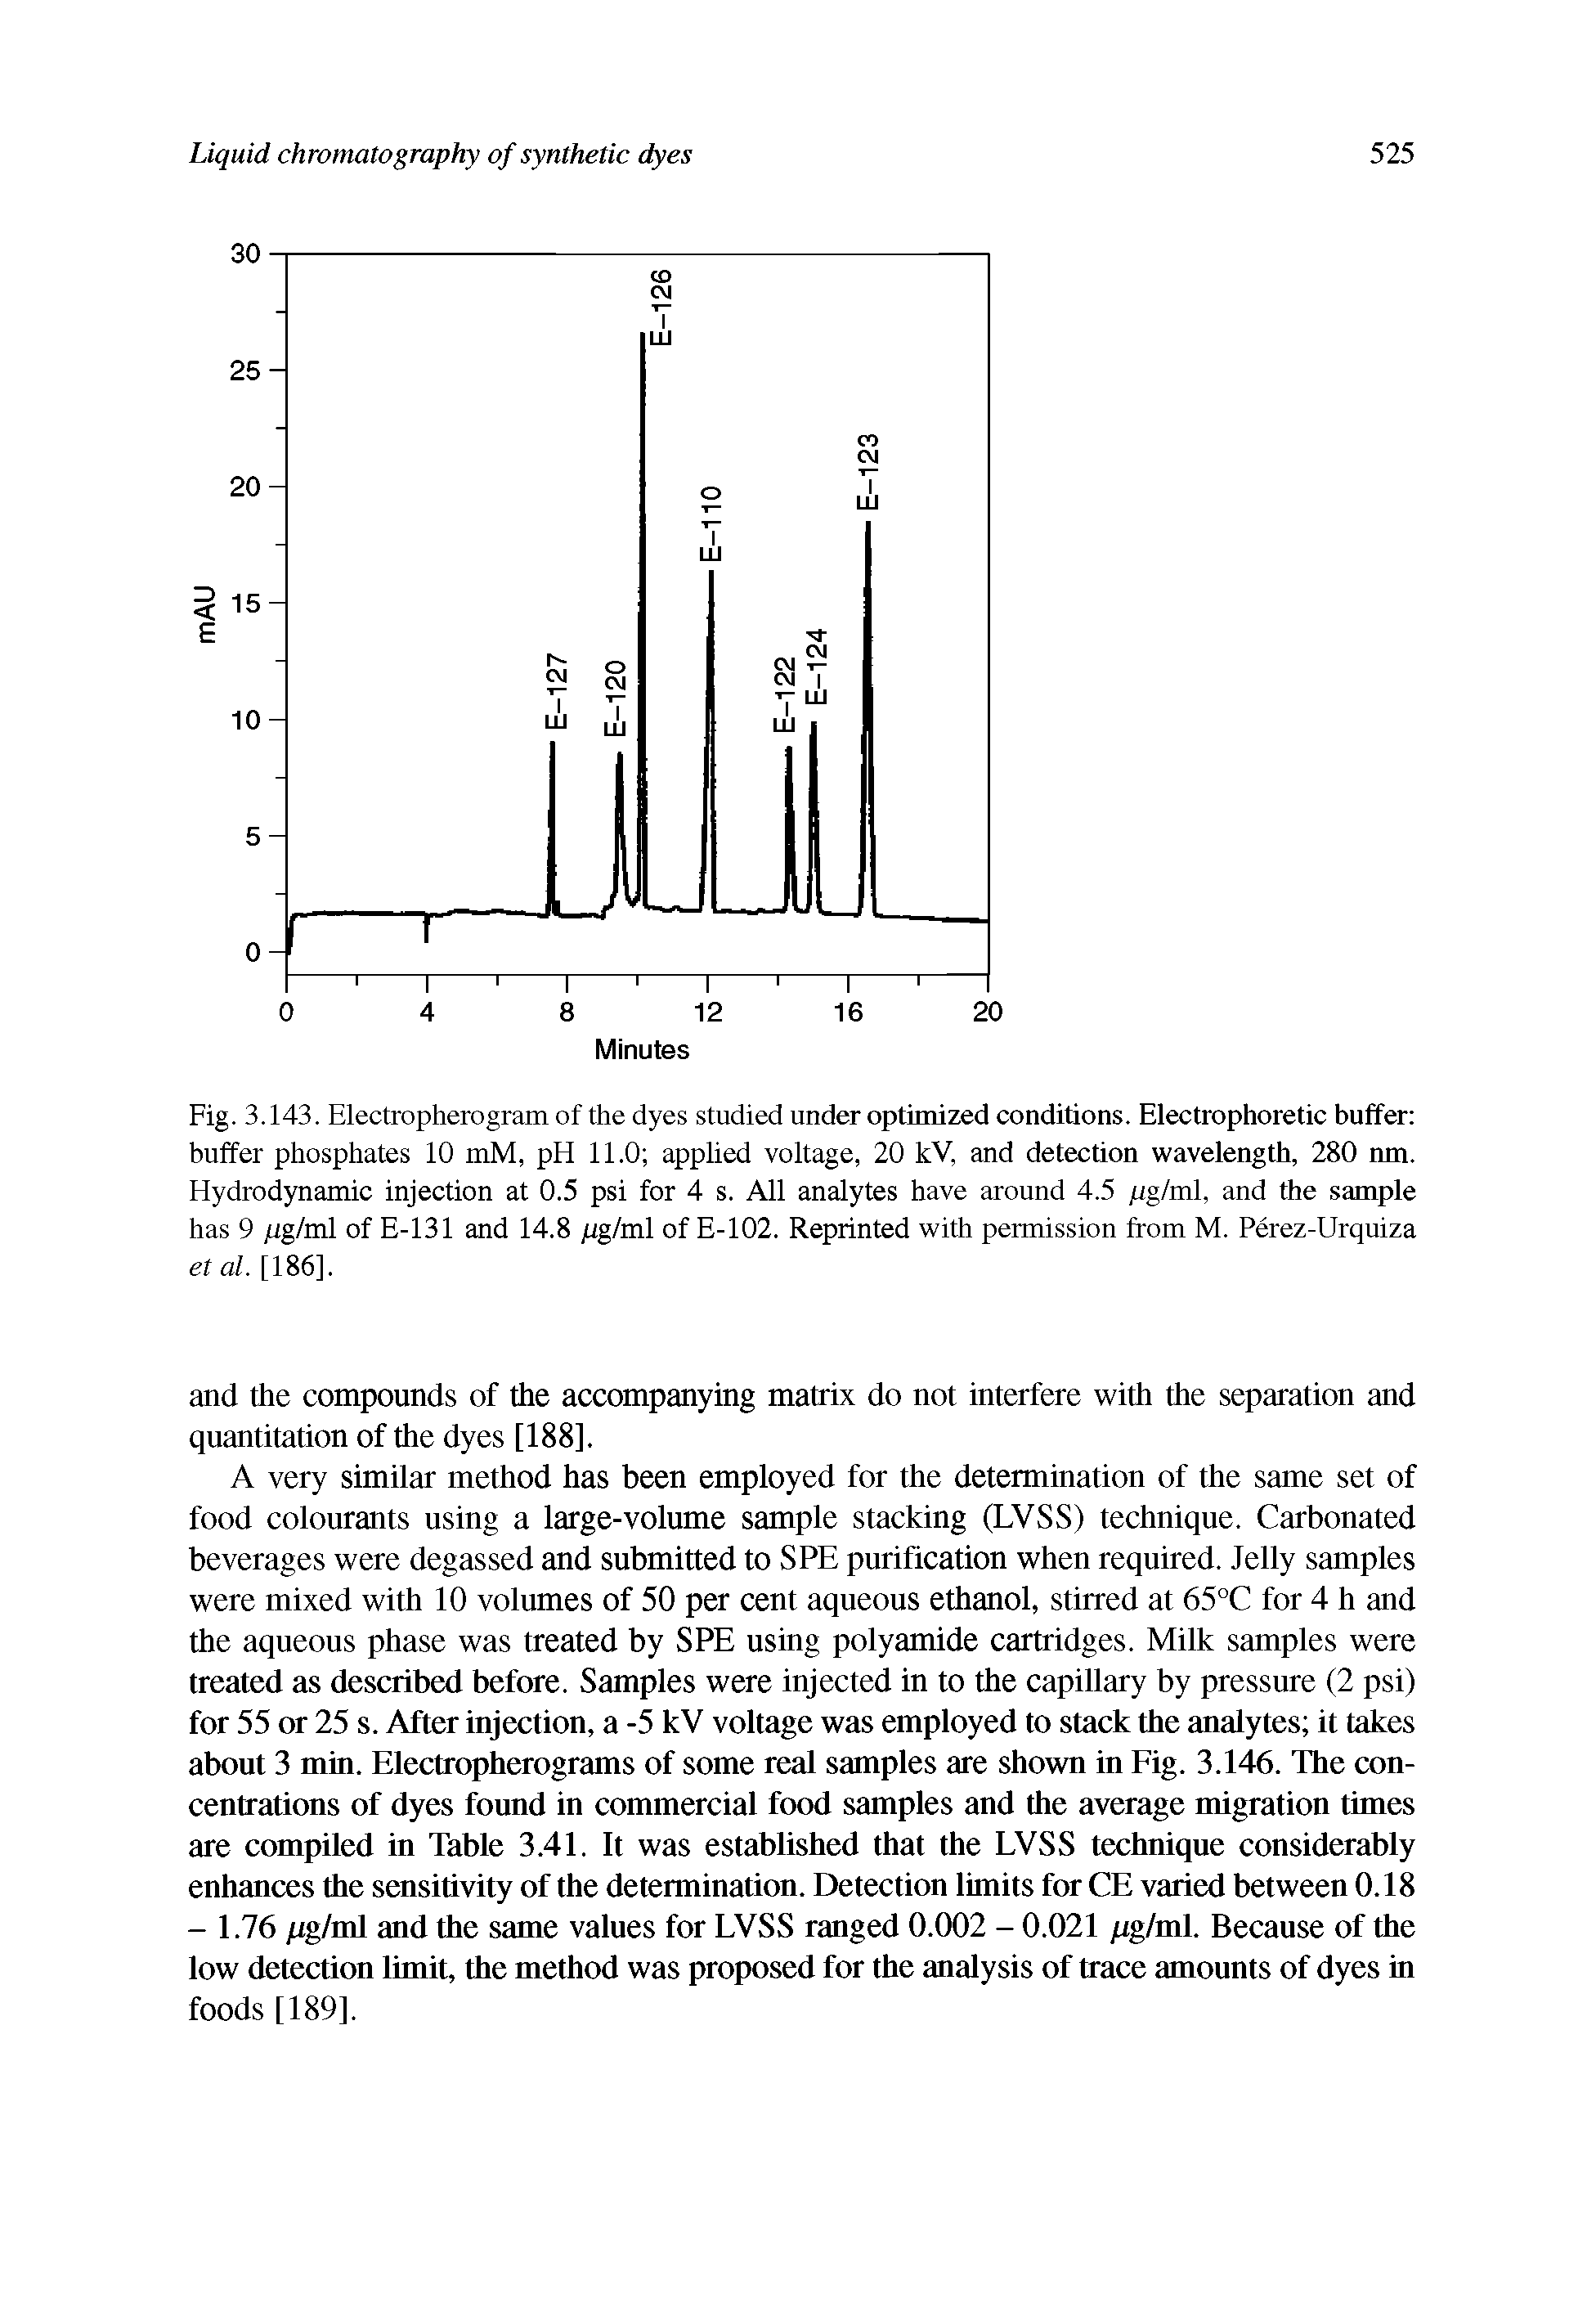 Fig. 3.143. Electropherogram of the dyes studied under optimized conditions. Electrophoretic buffer buffer phosphates 10 mM, pH 11.0 applied voltage, 20 kV, and detection wavelength, 280 nm. Hydrodynamic injection at 0.5 psi for 4 s. All analytes have around 4.5 pg/ml, and the sample has 9 yUg/ml of E-131 and 14.8 pg/ml of E-102. Reprinted with permission from M. Perez-Urquiza et al. [186],...